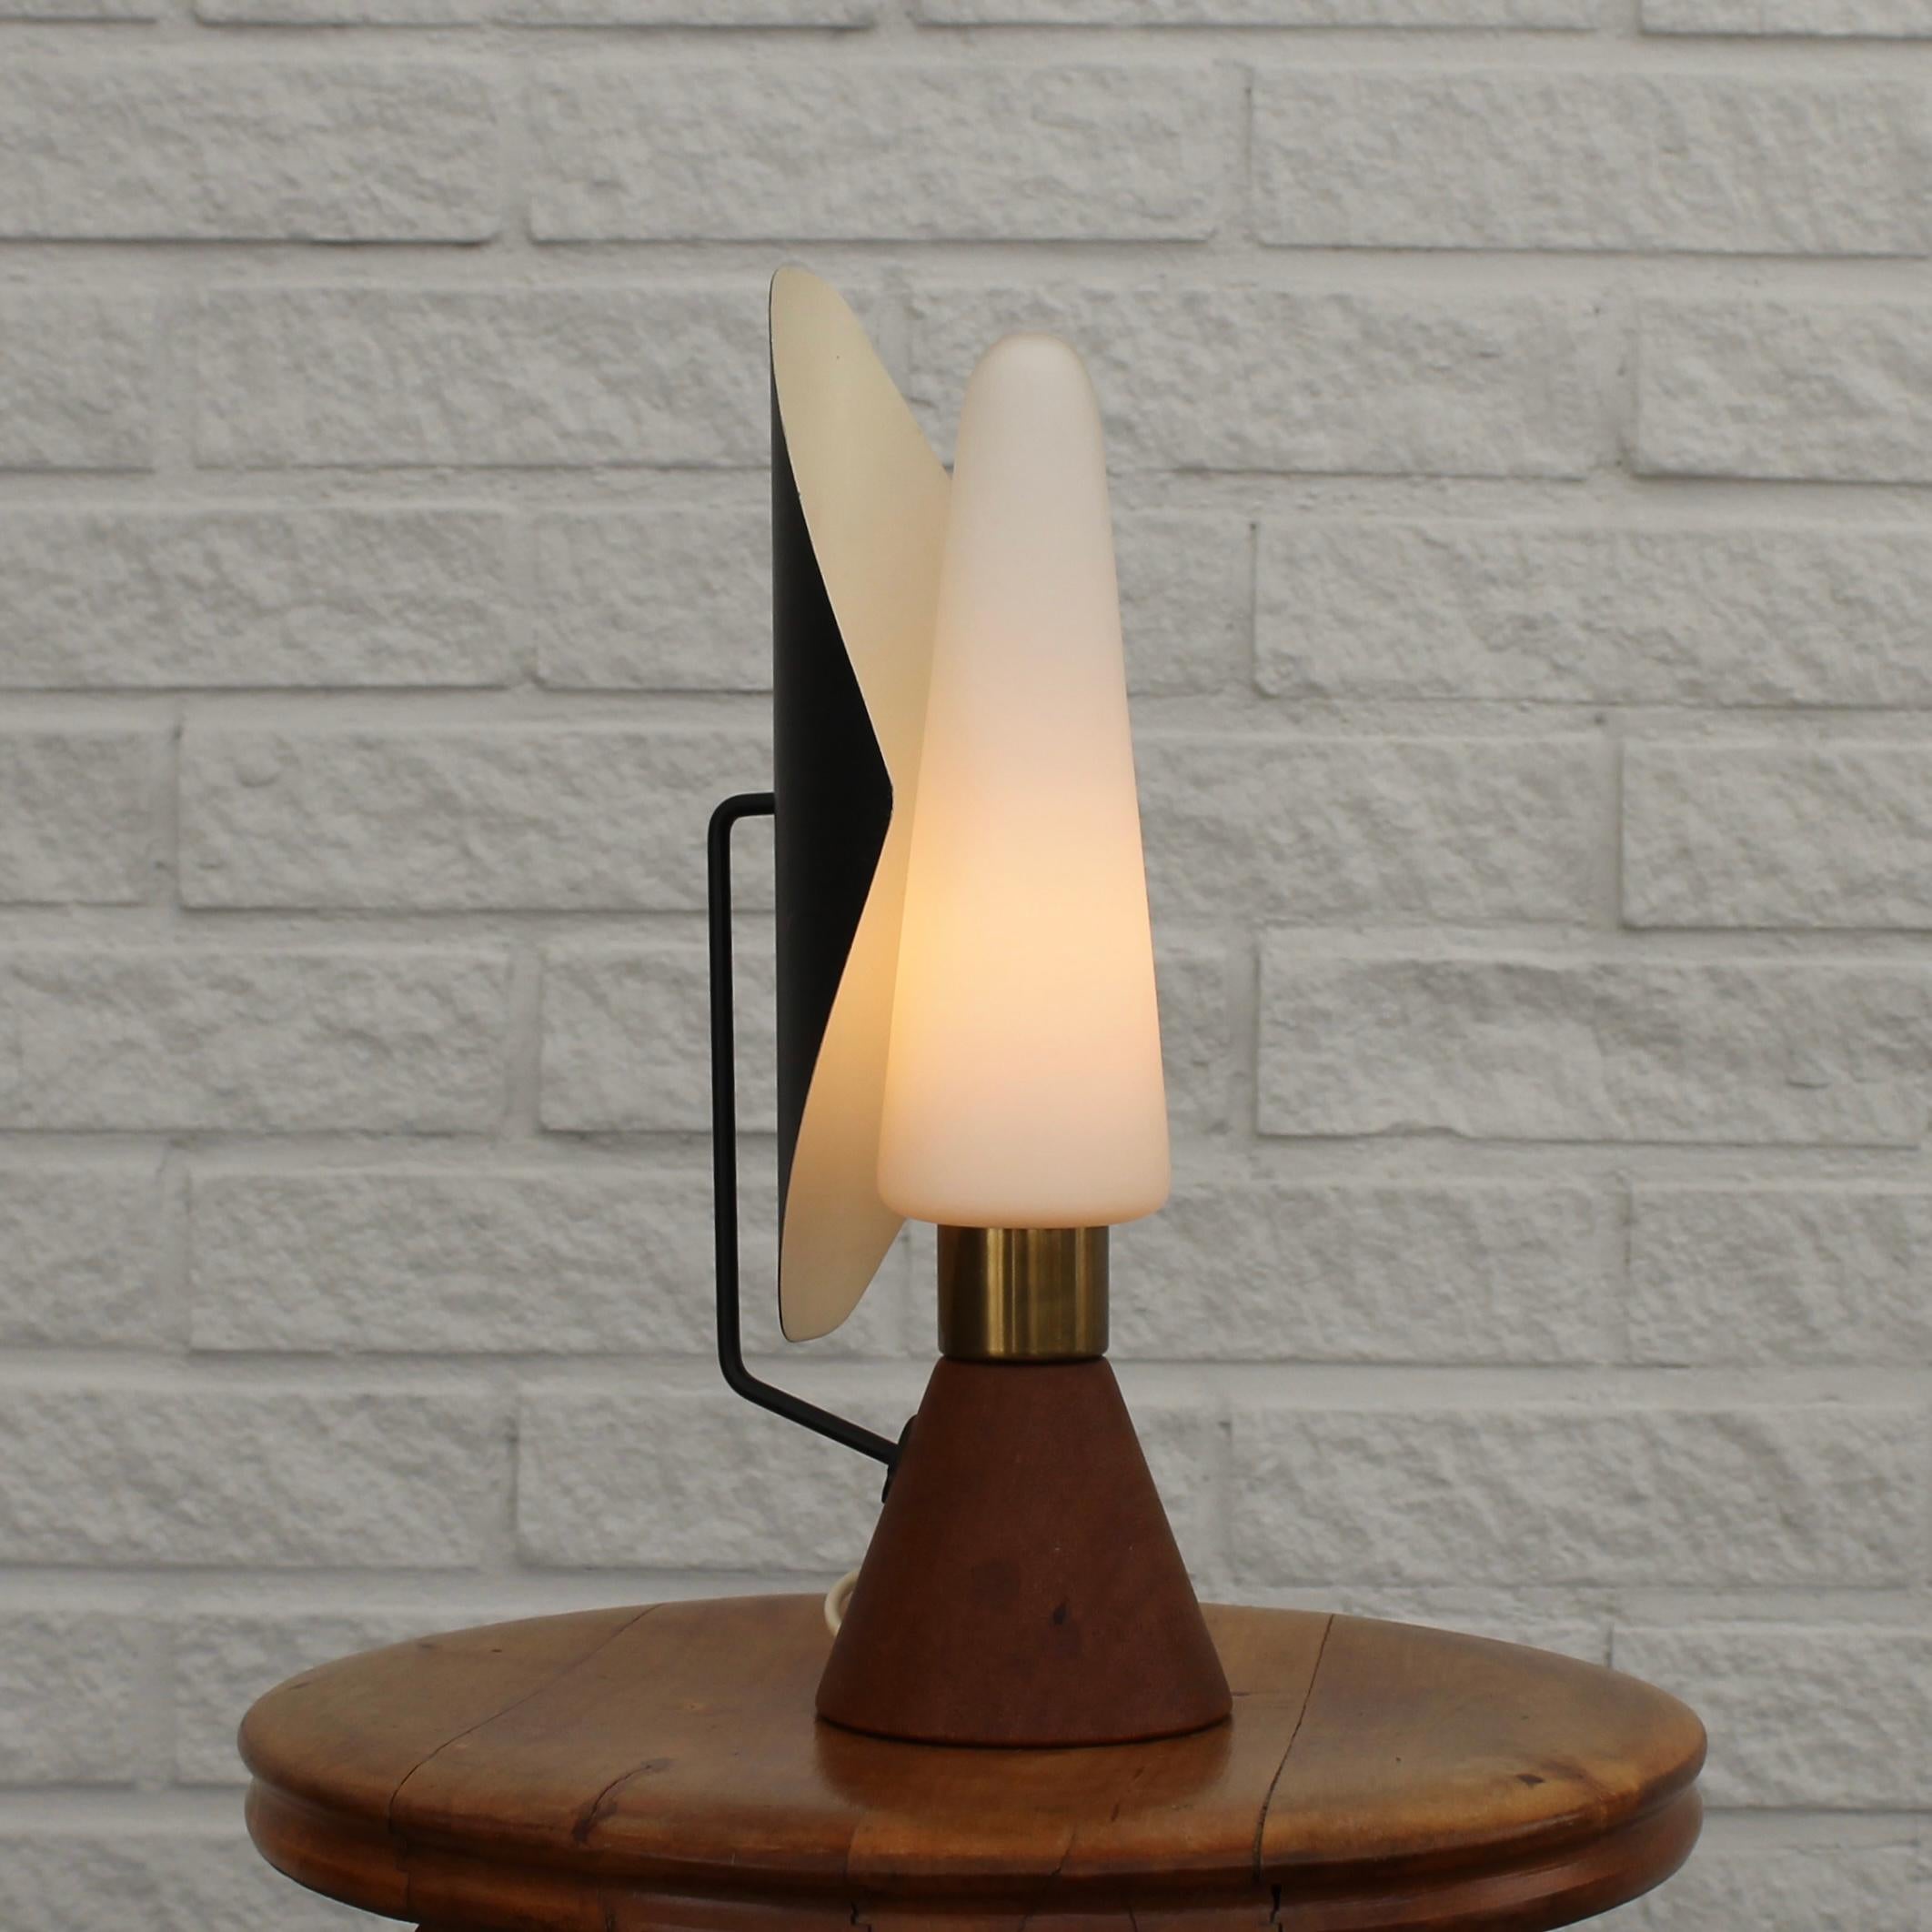 Rare ASEA table lamp, model E1296, dating back to the 1950s, featuring a cone-shaped base crafted from solid teak and an opaline glass shade secured by a brass cylinder. It incorporates a metal reflector, allowing for adjustable light direction.